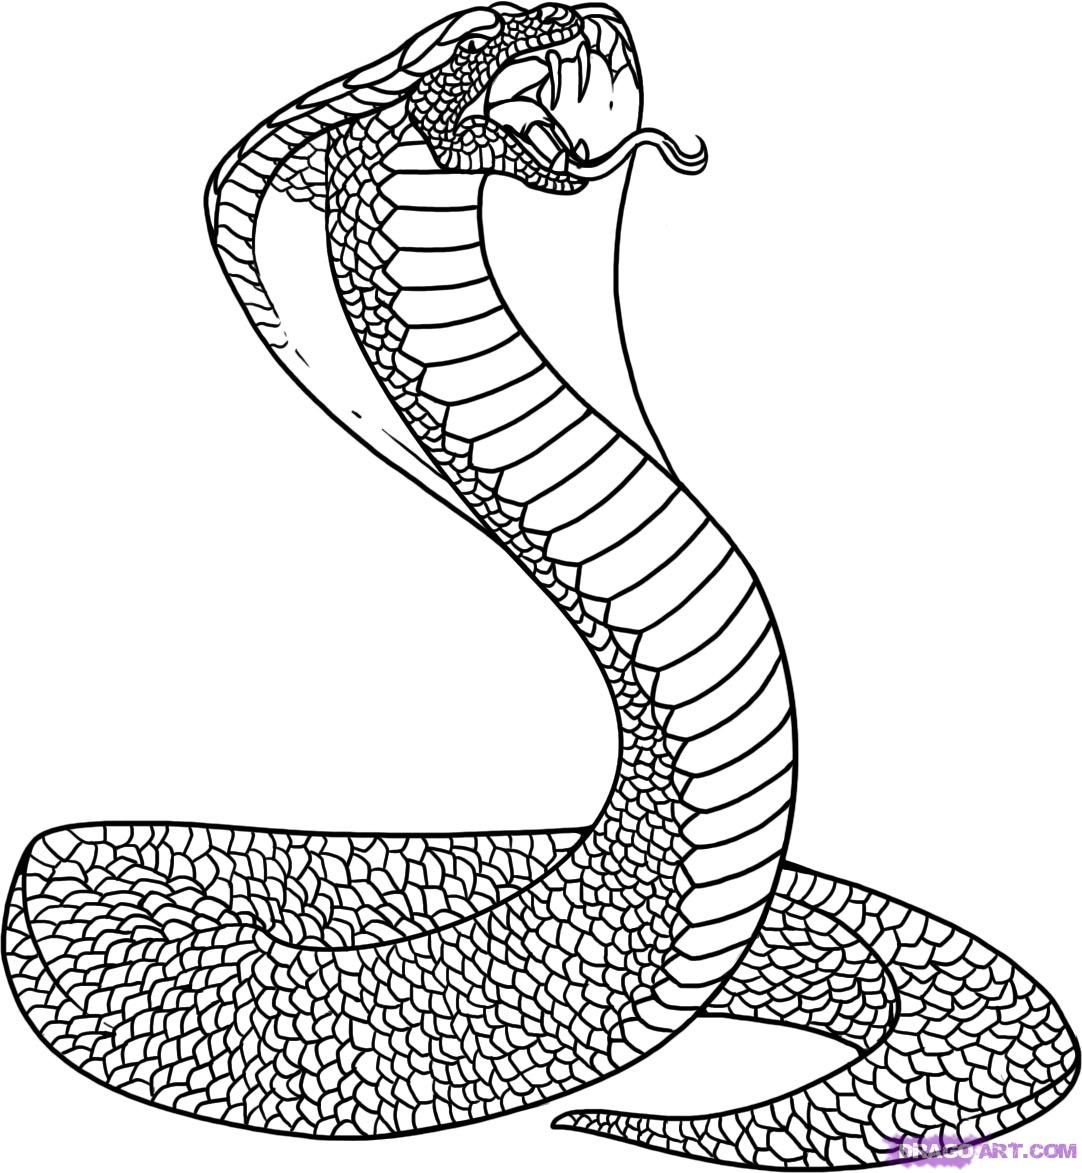 Free Printable Snake Coloring Pages Free Printable Templates | The Best ...